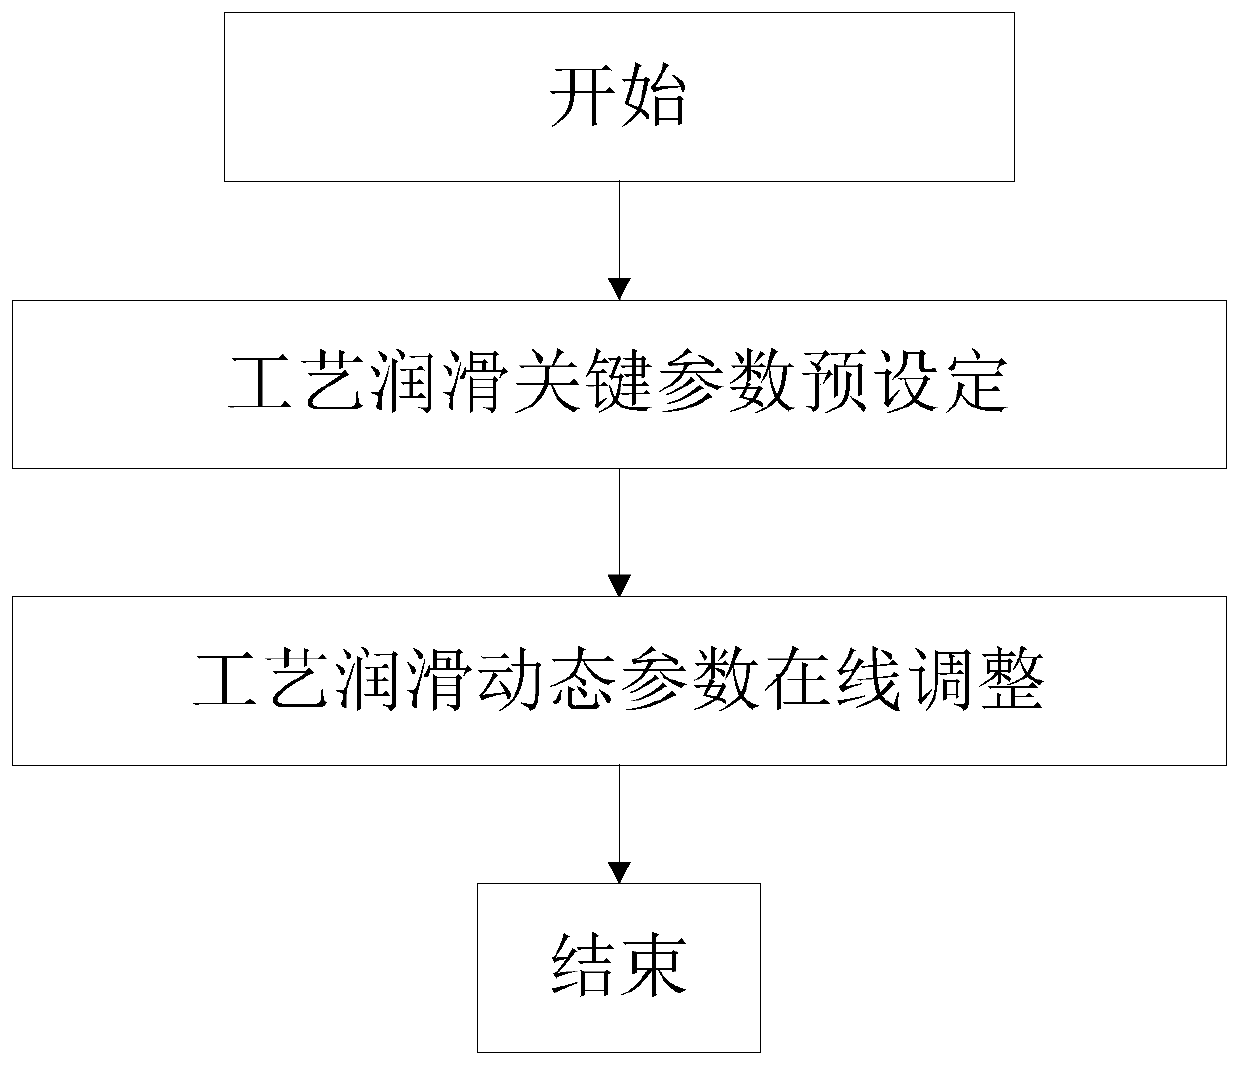 Process lubricating system control method for wet leveling unit aiming at coarseness